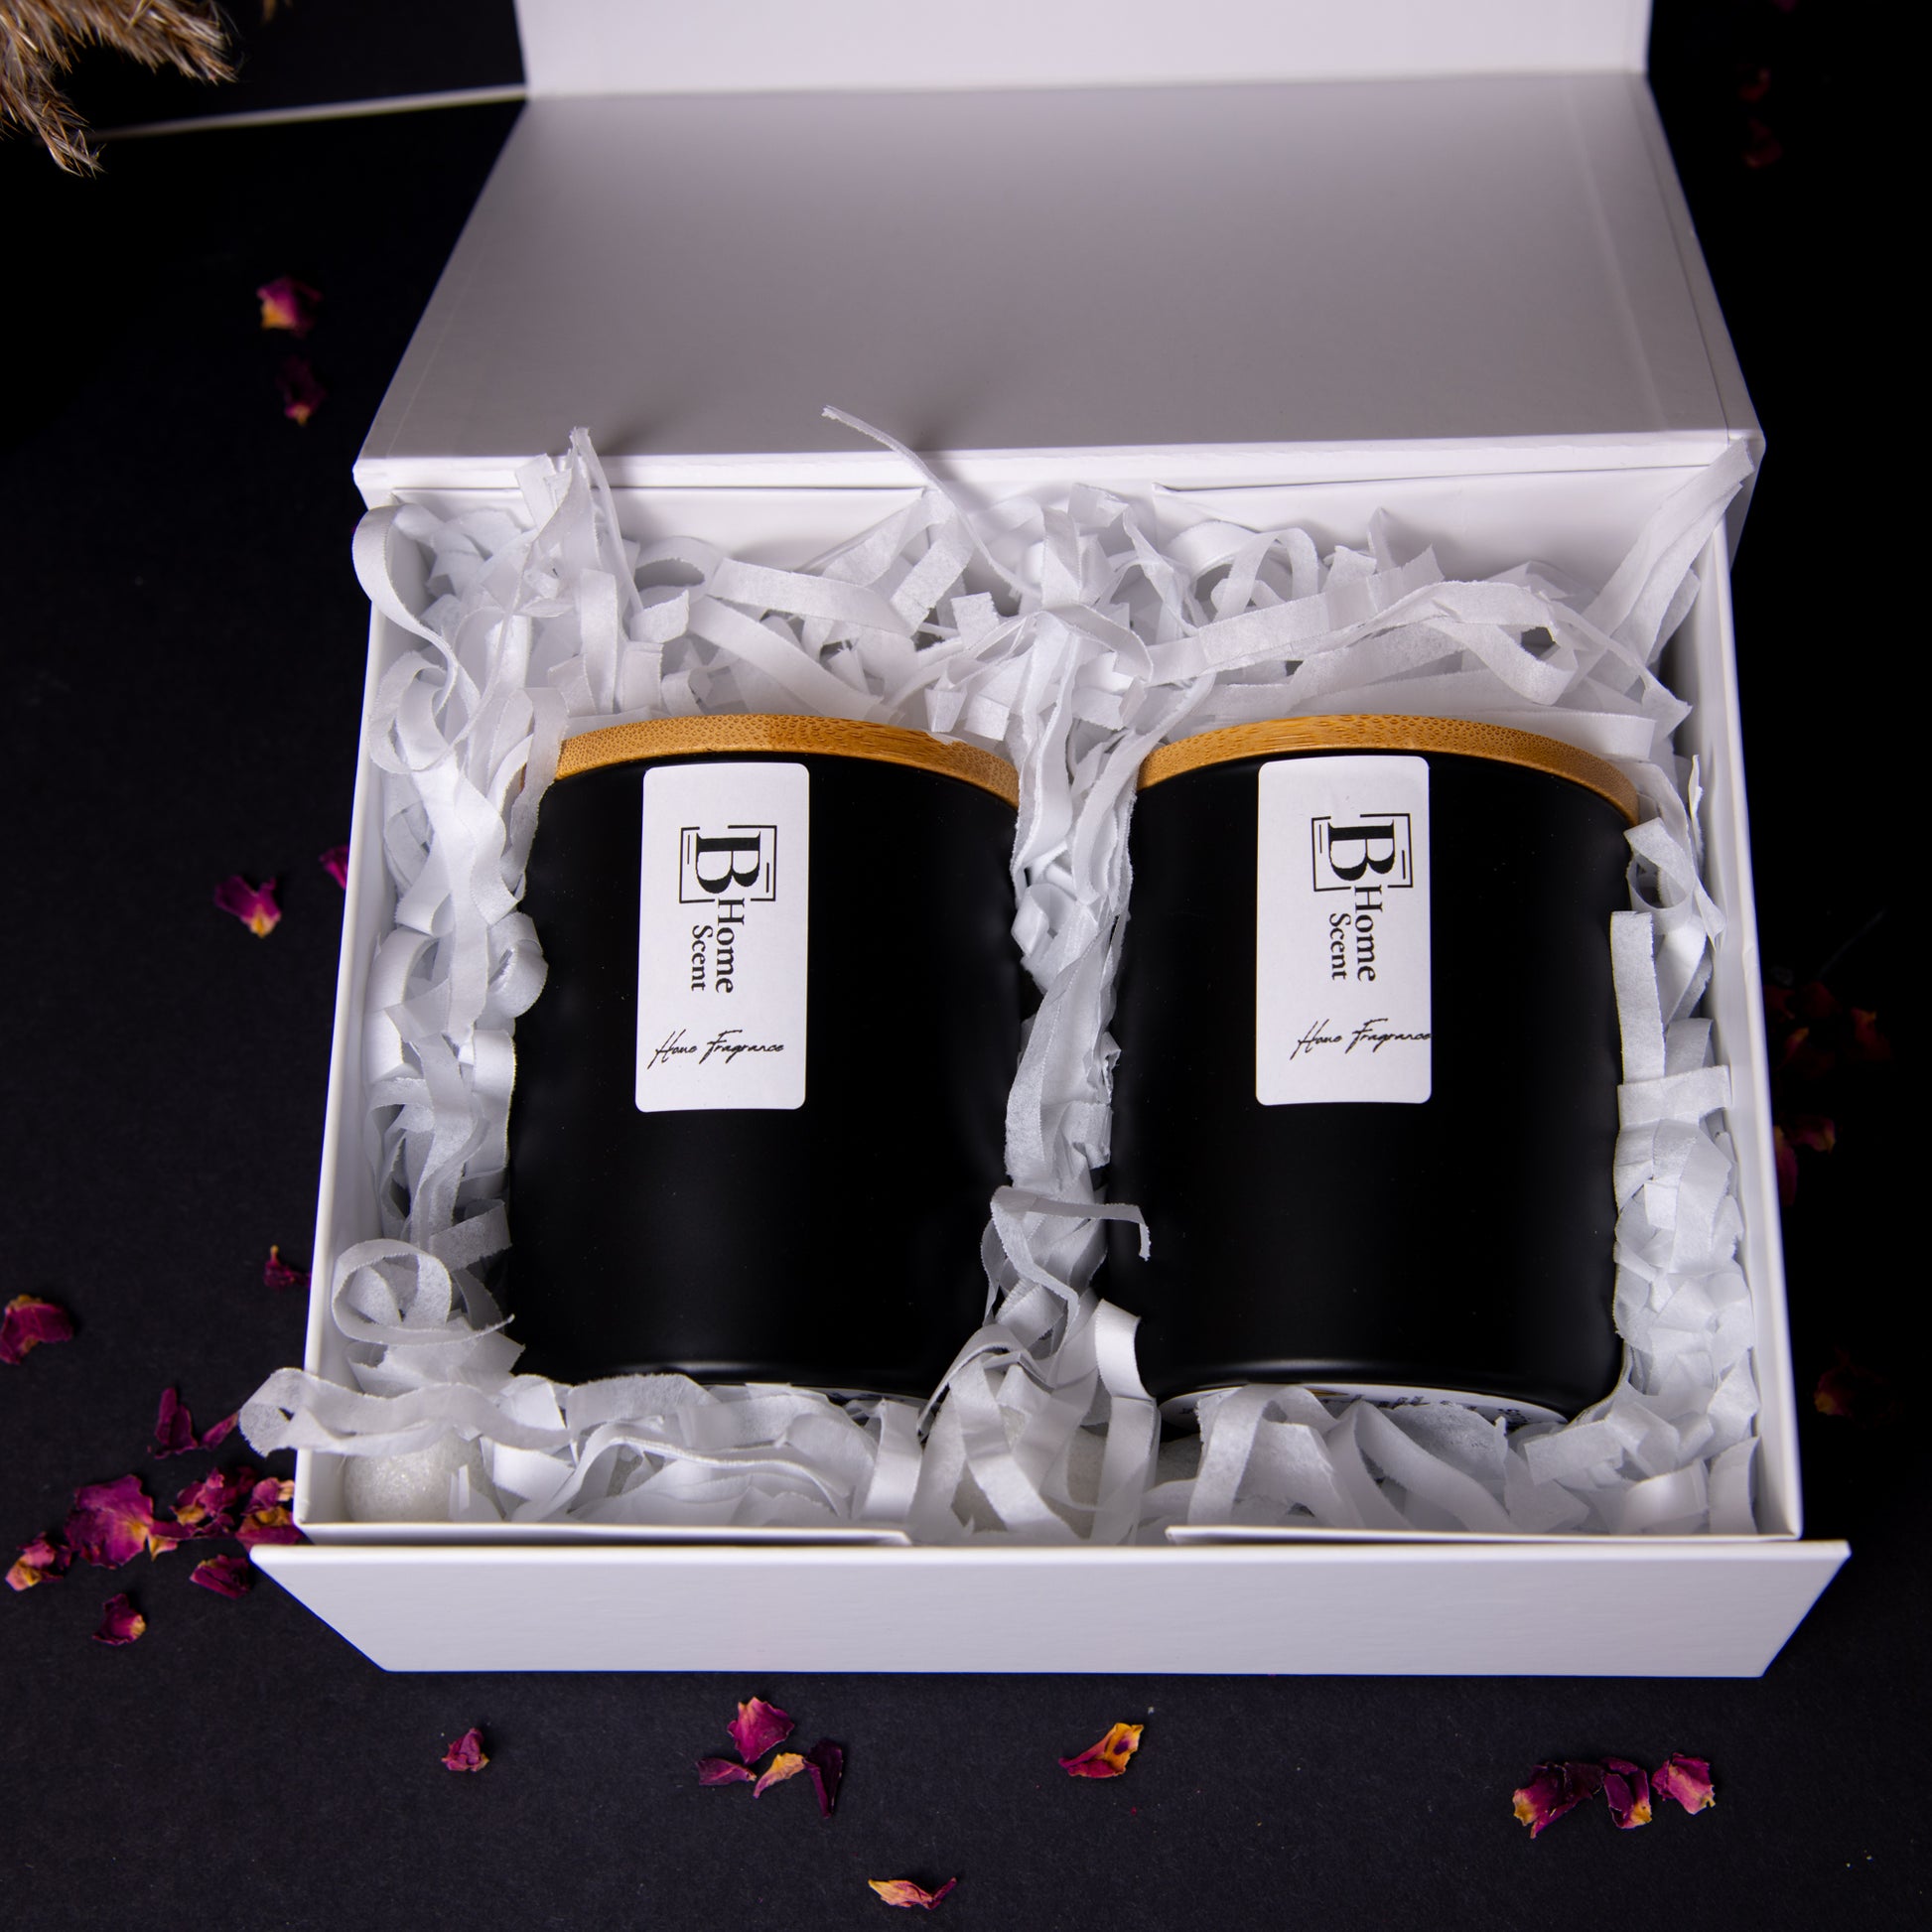 2 candles with wooden lids in gift box